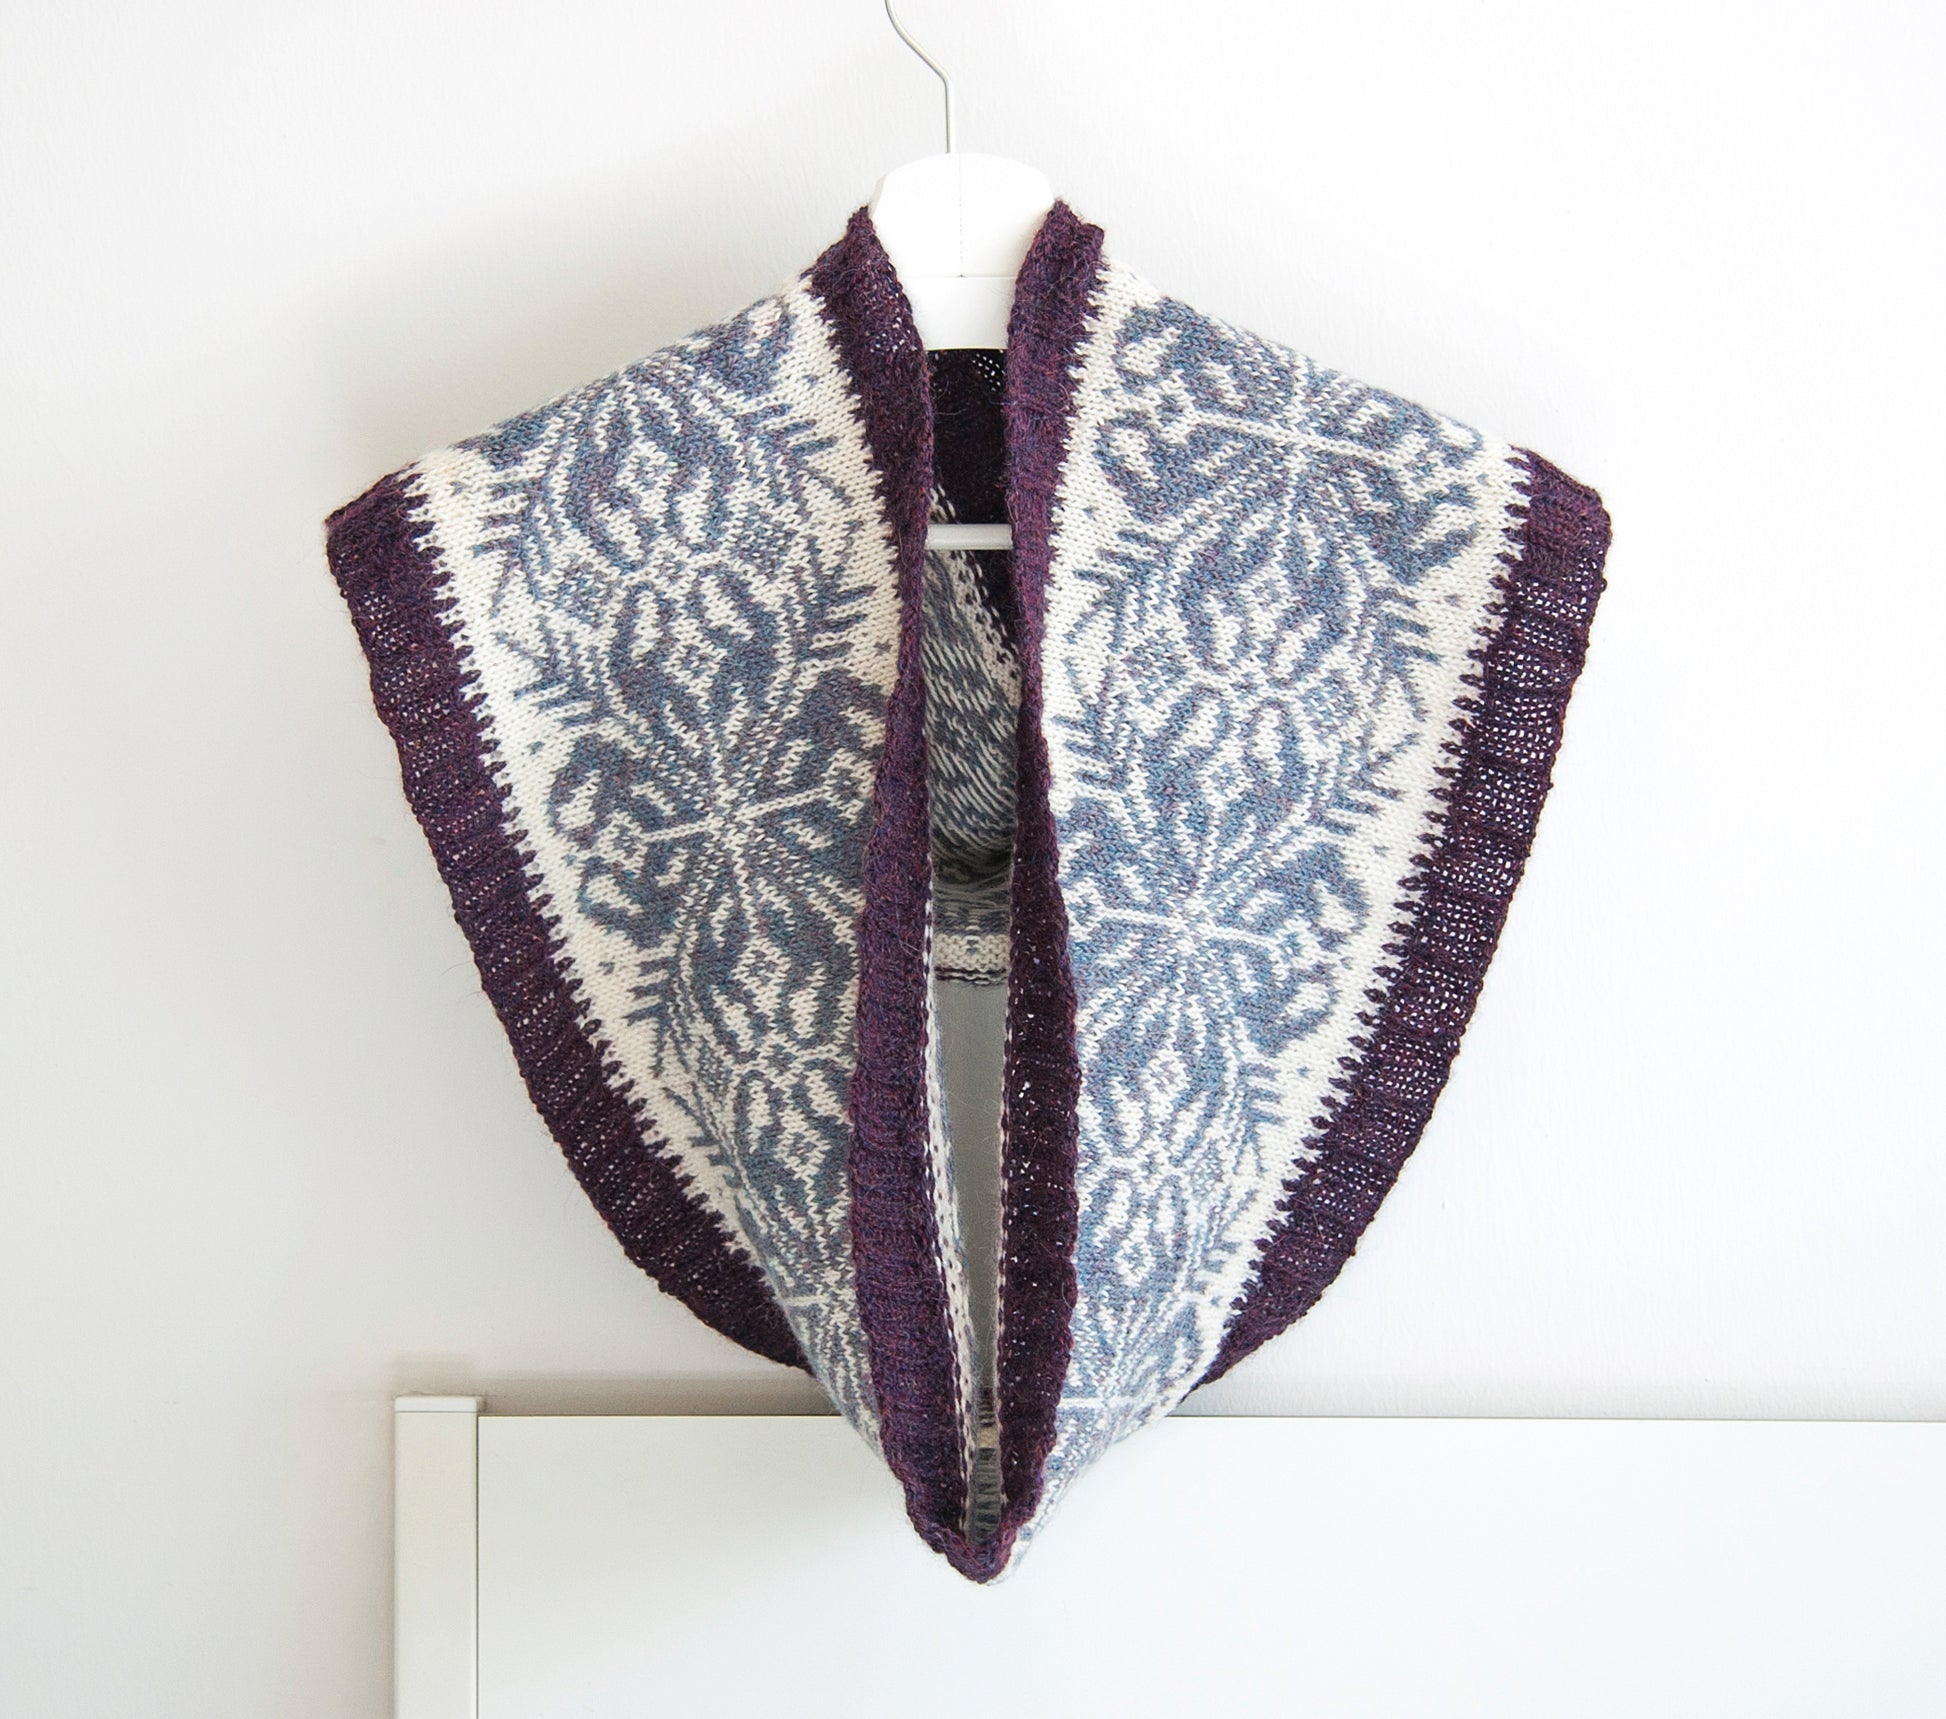 Hand-knitted Fair Isle cowl in Snowflake pattern design